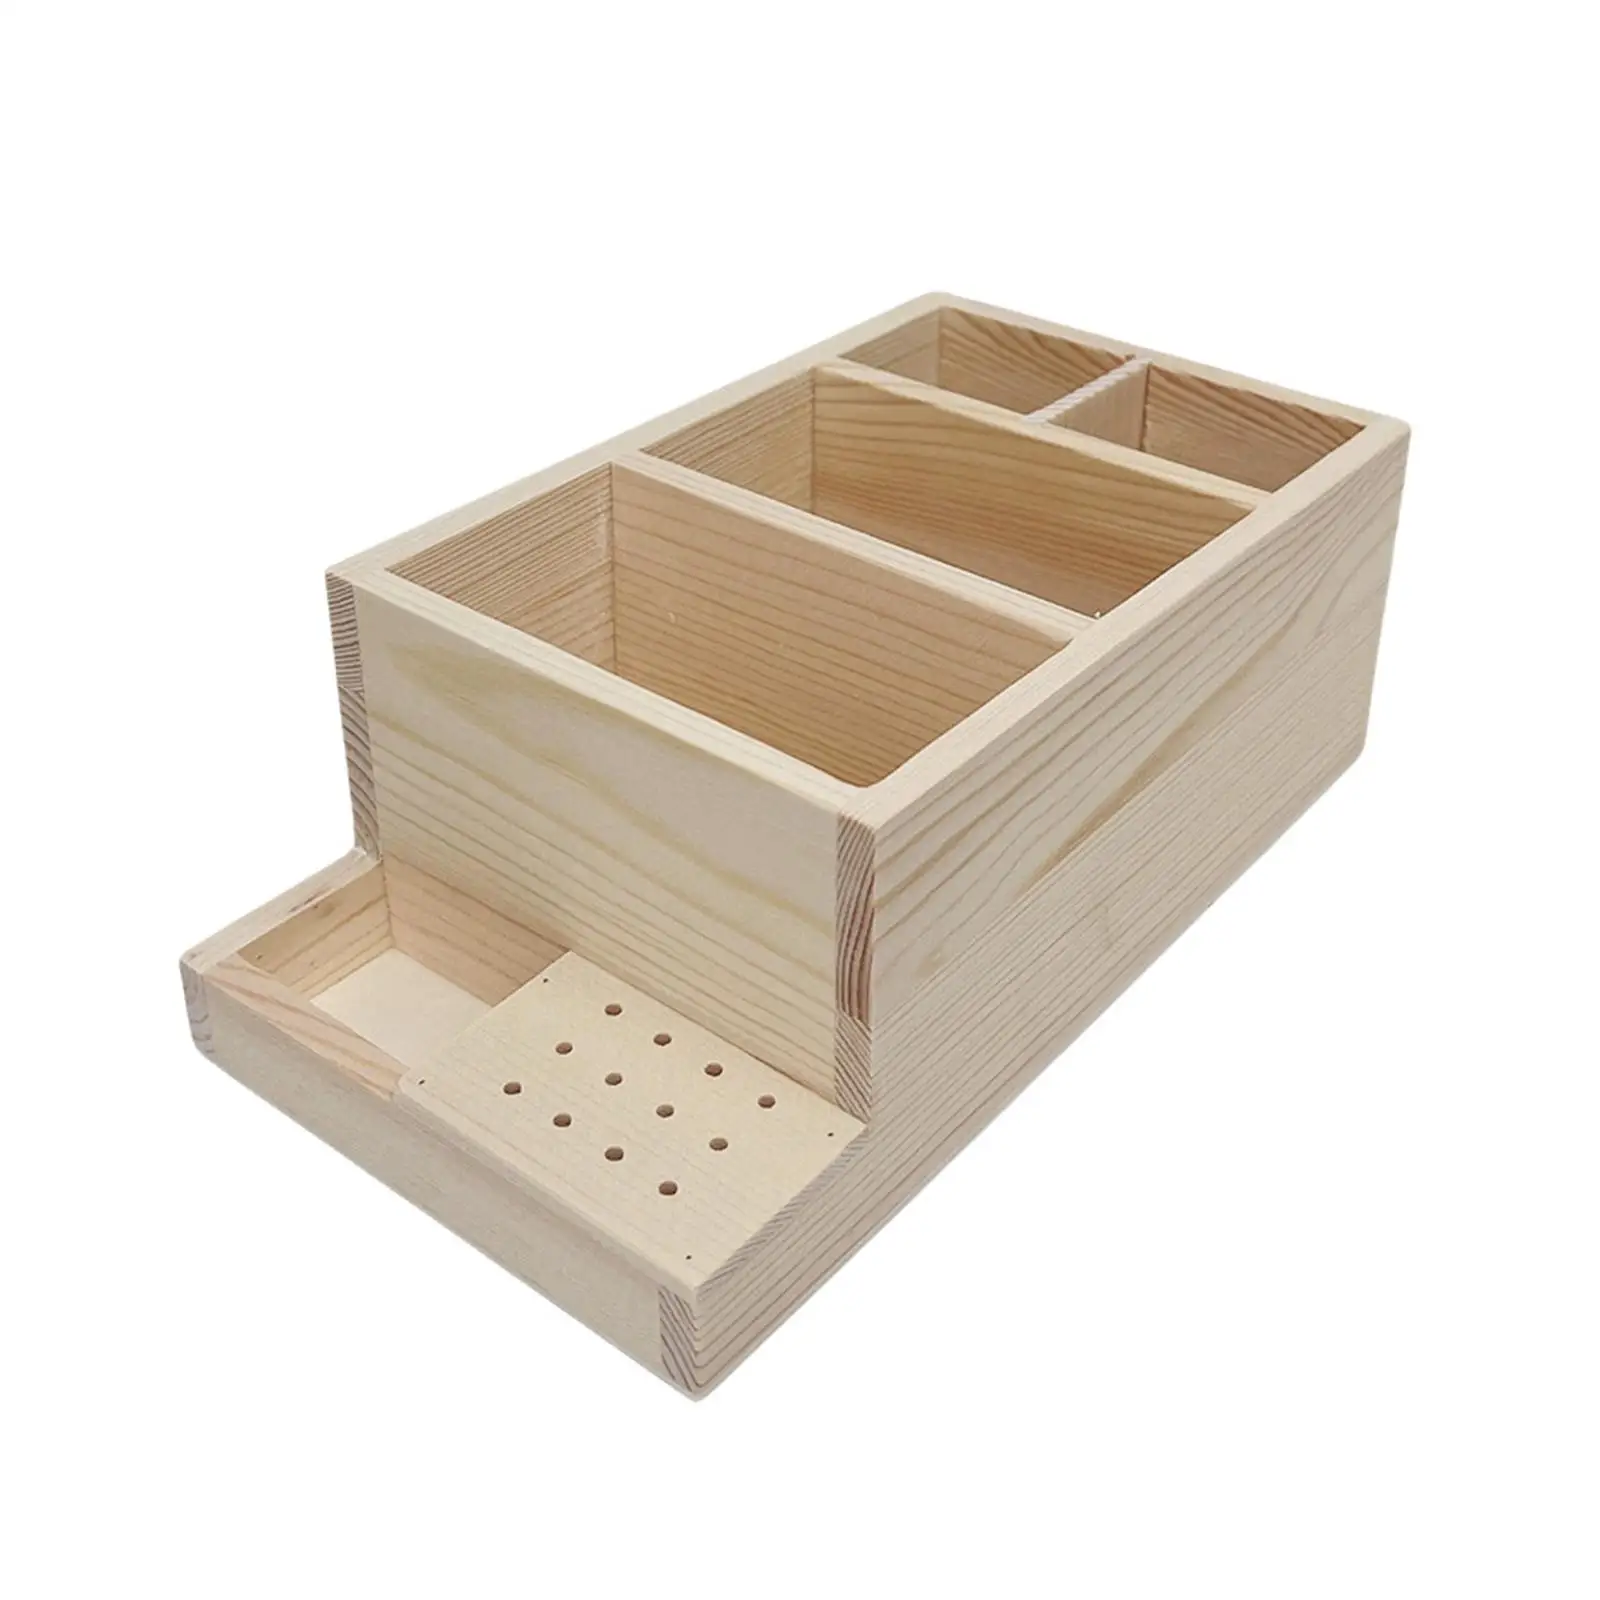 Wood Nail Drill Bits Wood Stand Organizer Accessory Manicure Tools Box Container